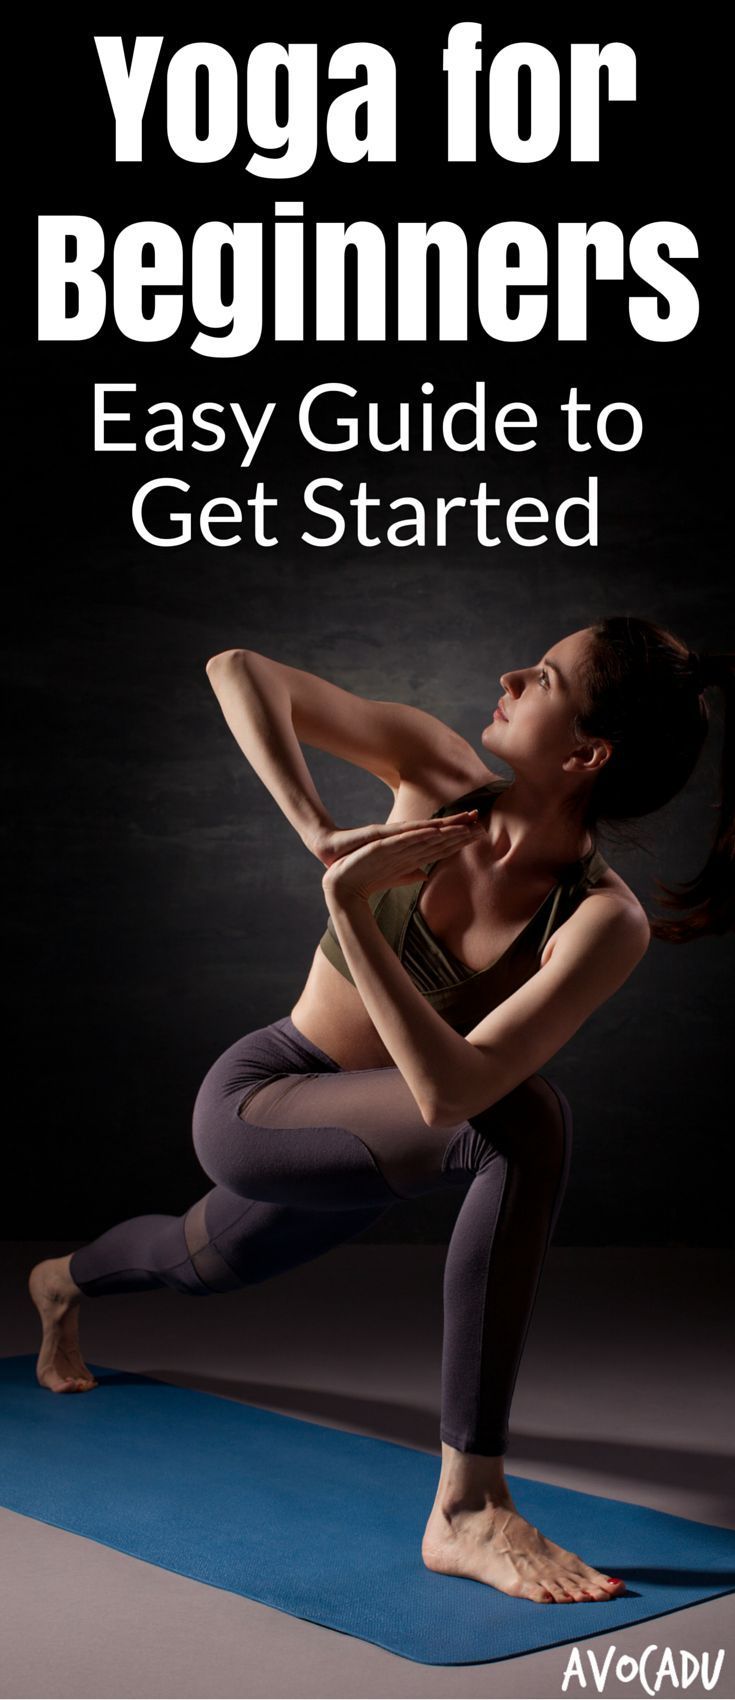 Yoga for Beginners | How to Get Started with Yoga | Yoga Tips for Beginners | av...